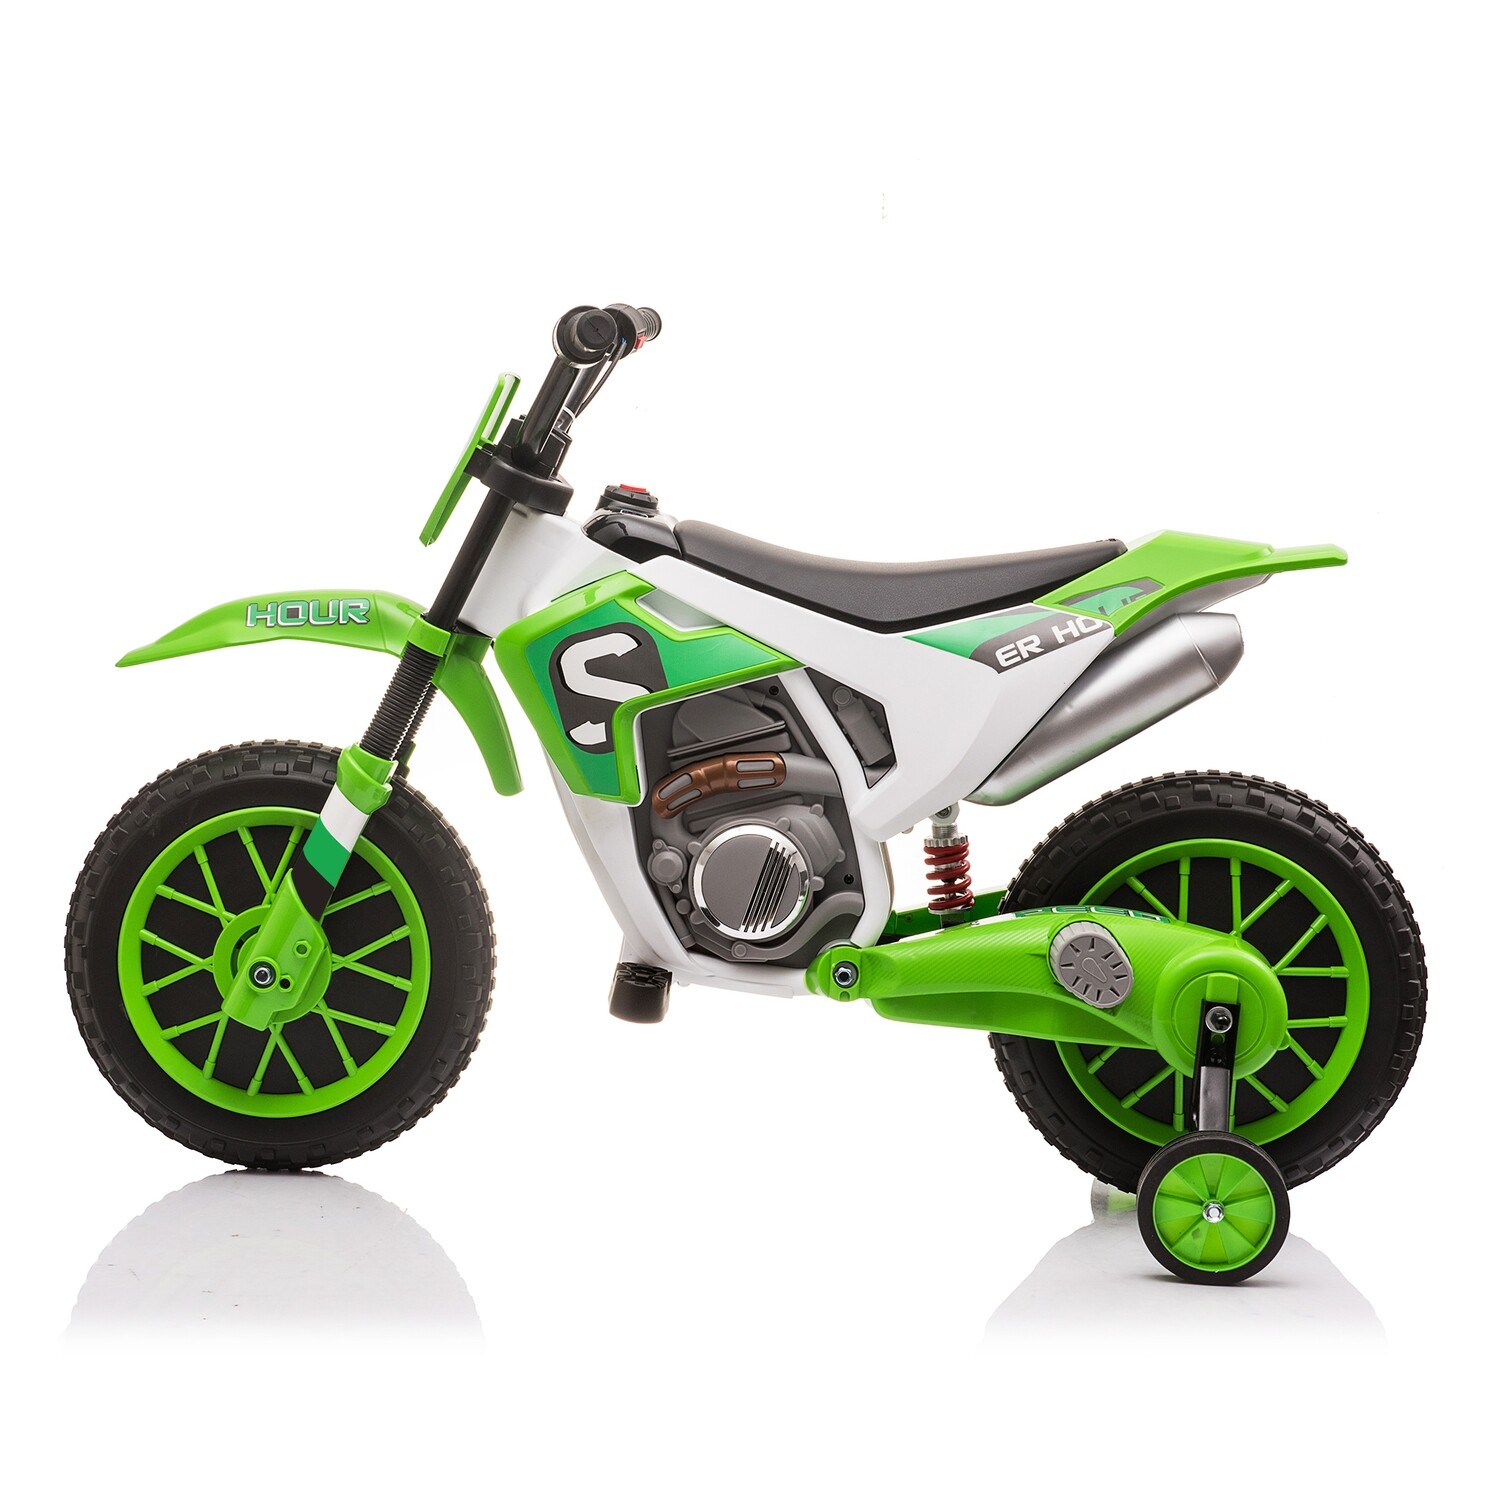 12V Kids Ride on Toy Motorcycle, Electric Motor Toy Bike with Training Wheels for Kids 3-6, Green, Options: Yellow+Polypropylene